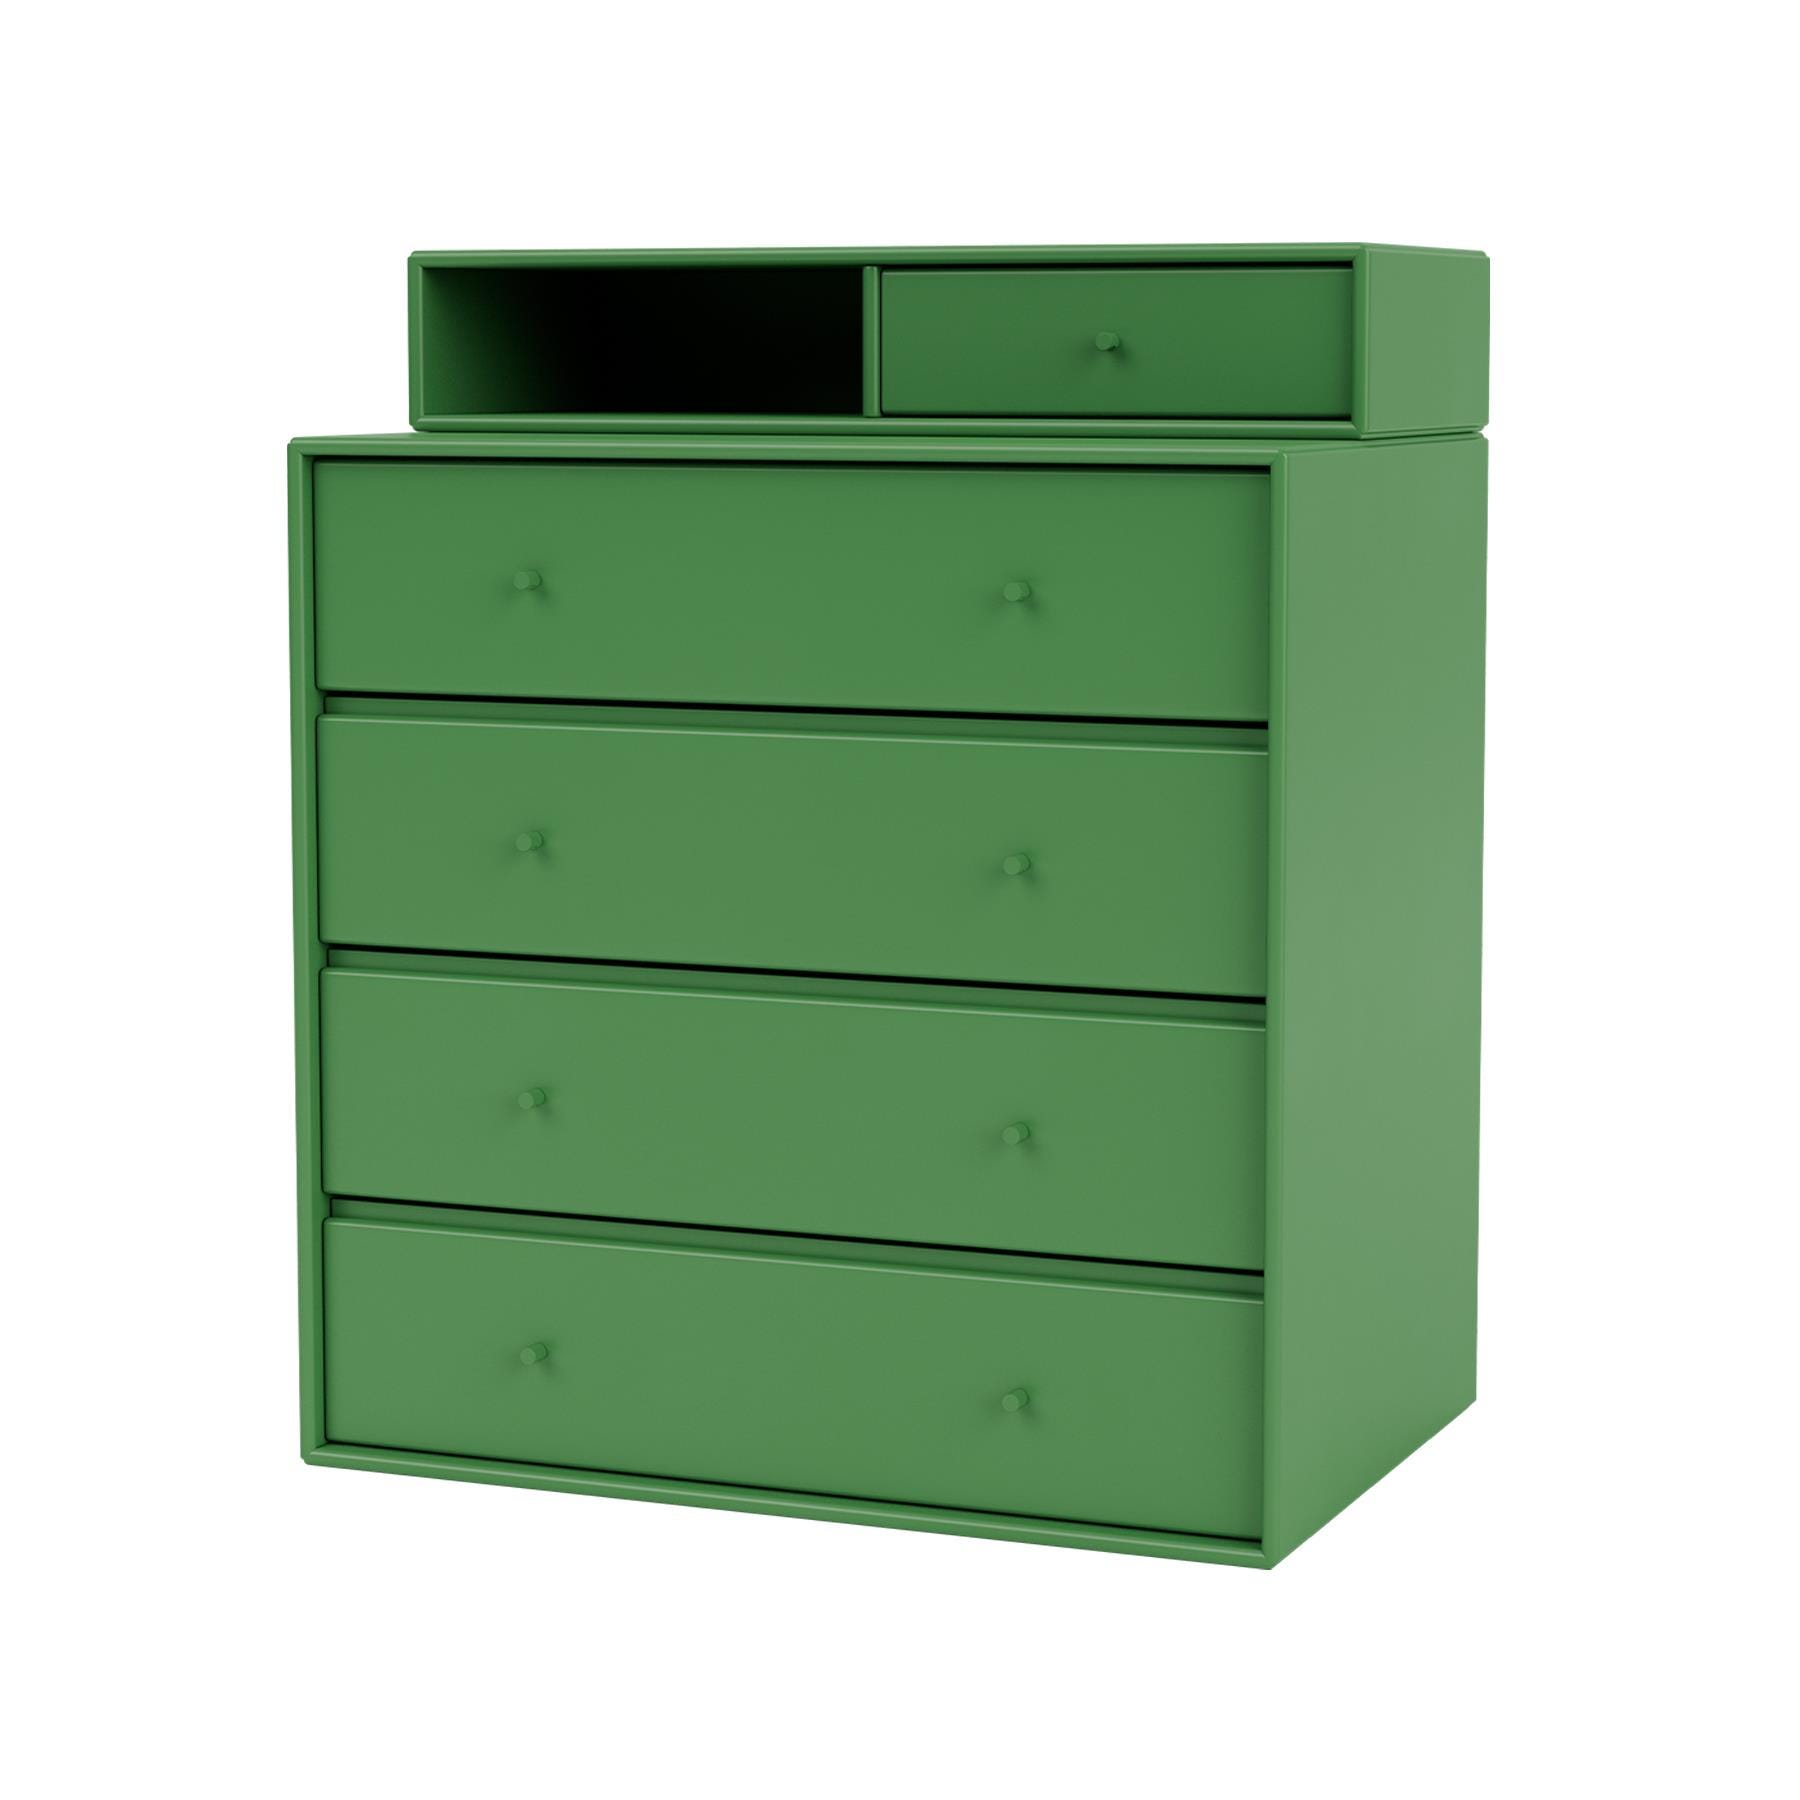 Montana Keep Chest Of Drawers Parsley Wall Mounted Green Designer Furniture From Holloways Of Ludlow